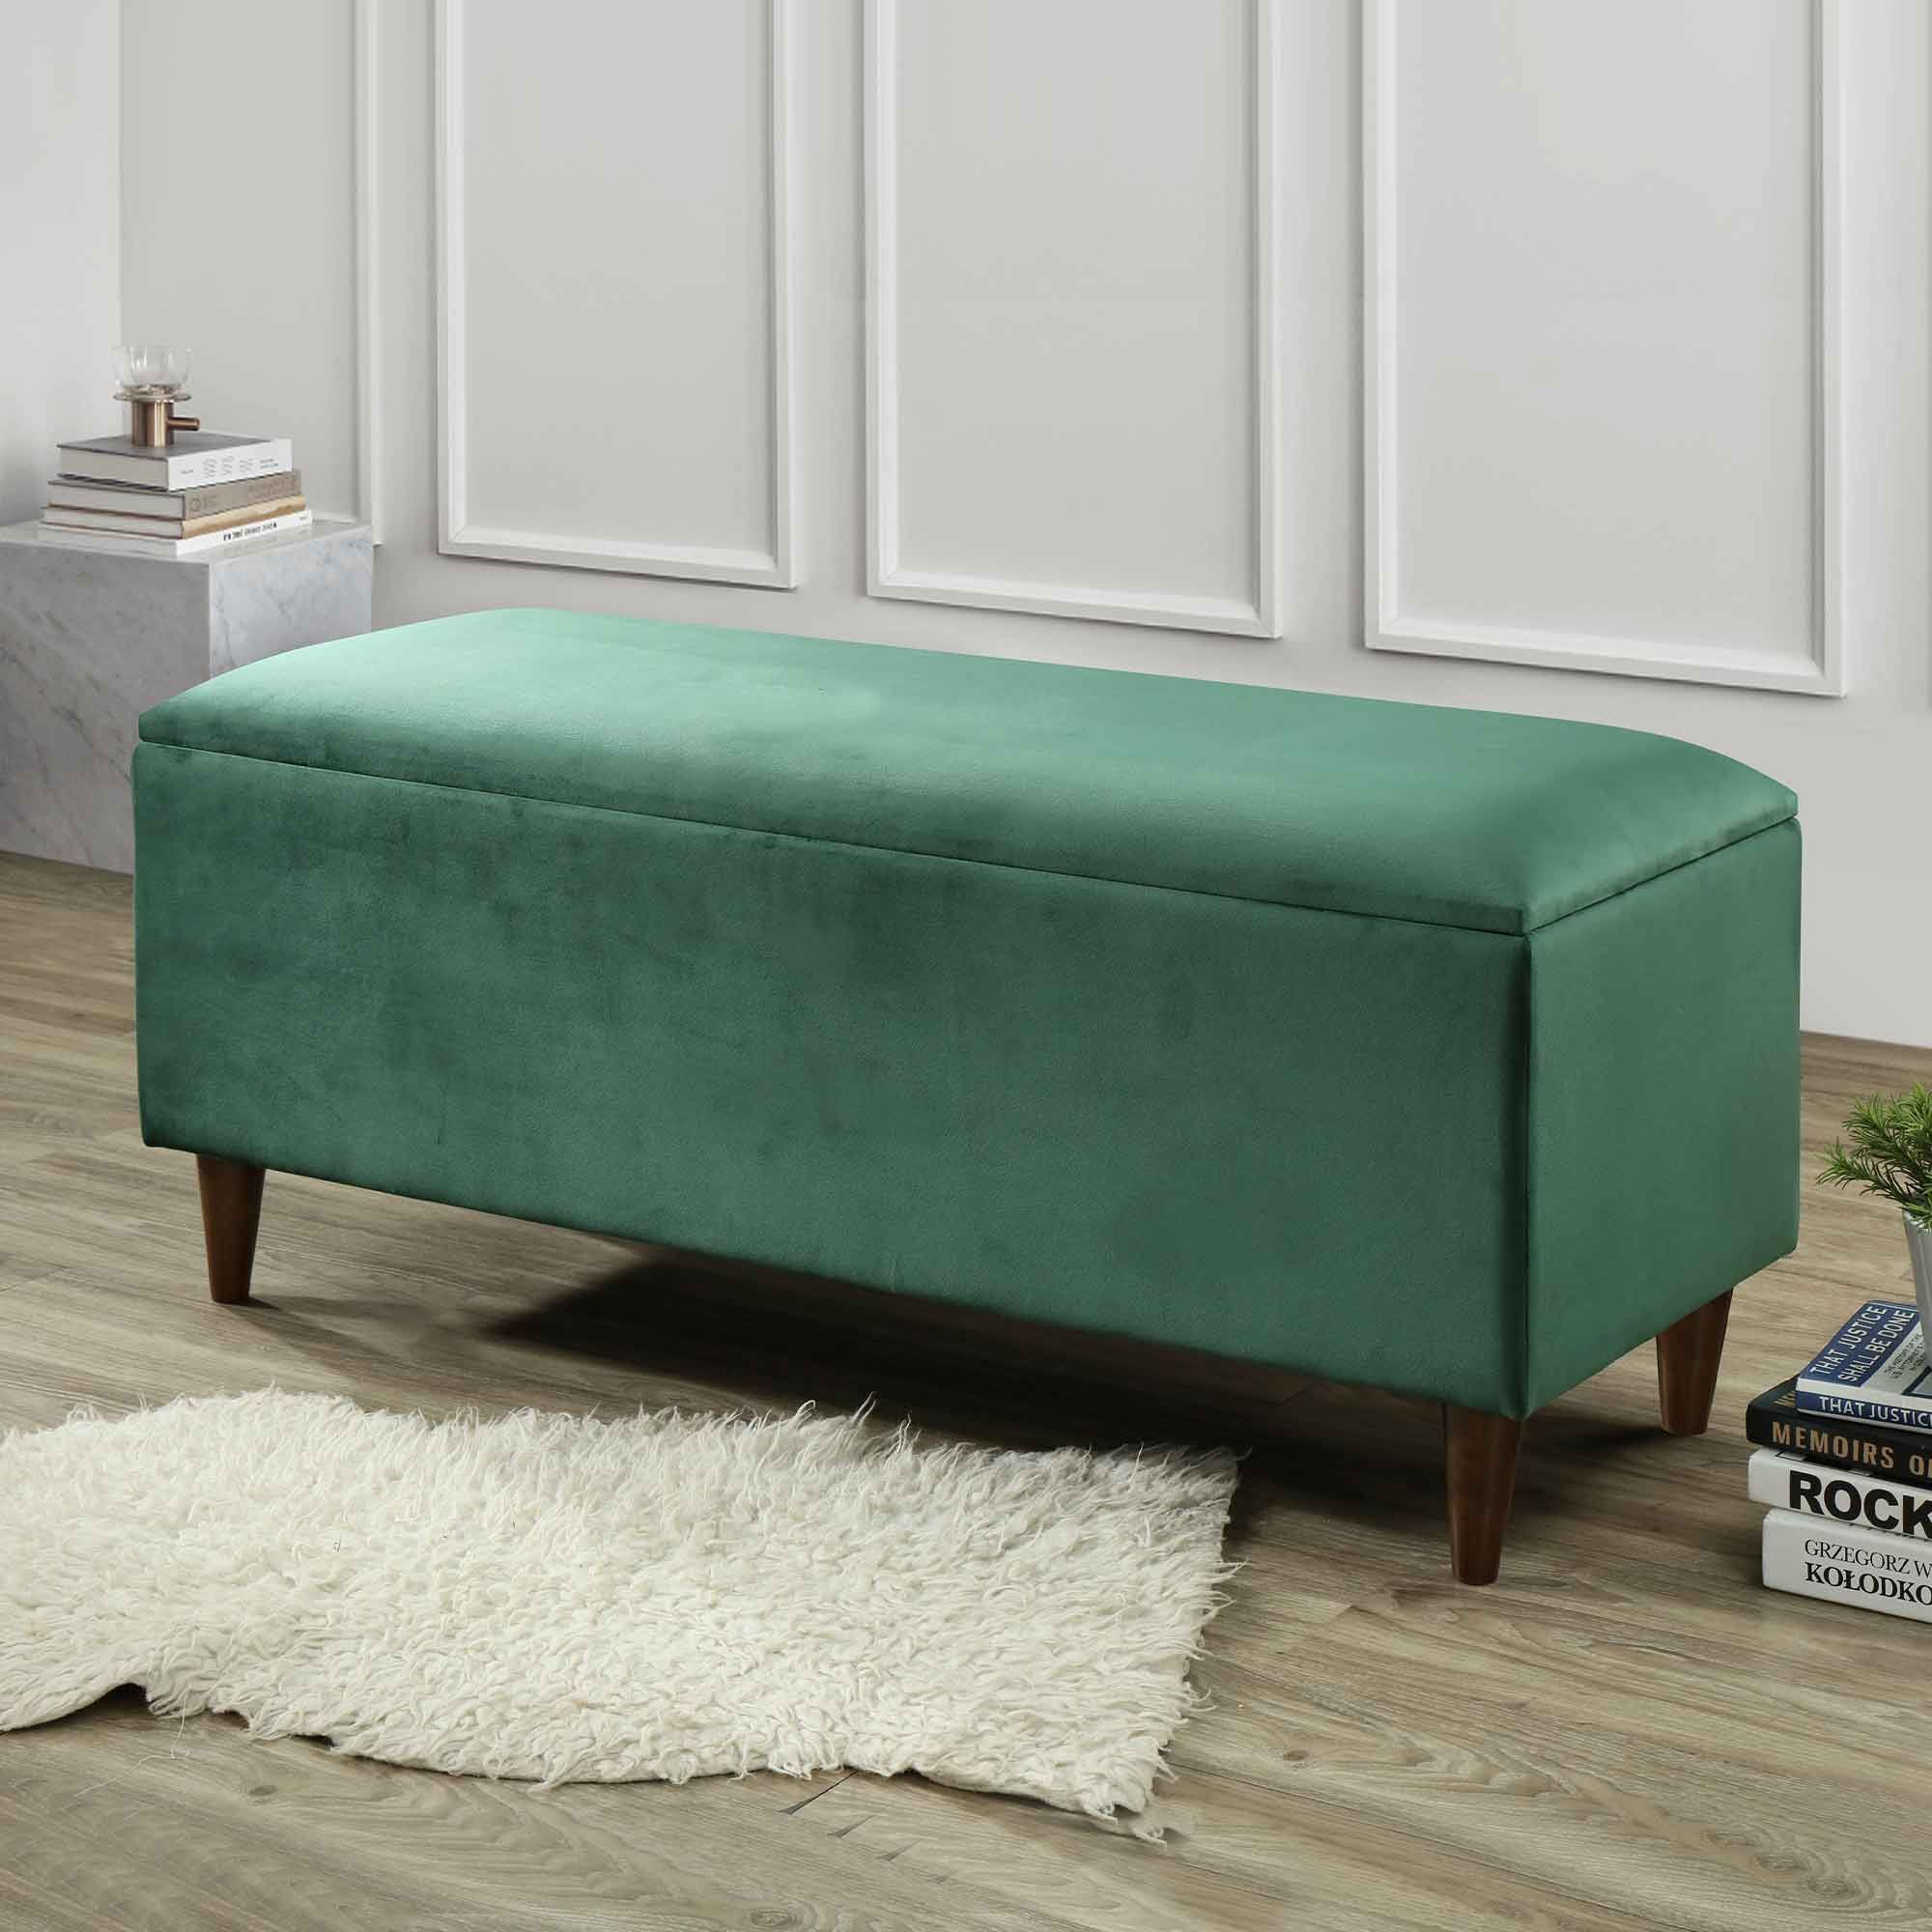 Emma Fabric Ottoman | Emma Storage Ottoman Fabric Green |shop Online Intended For Fabric Storage Ottomans (View 4 of 20)